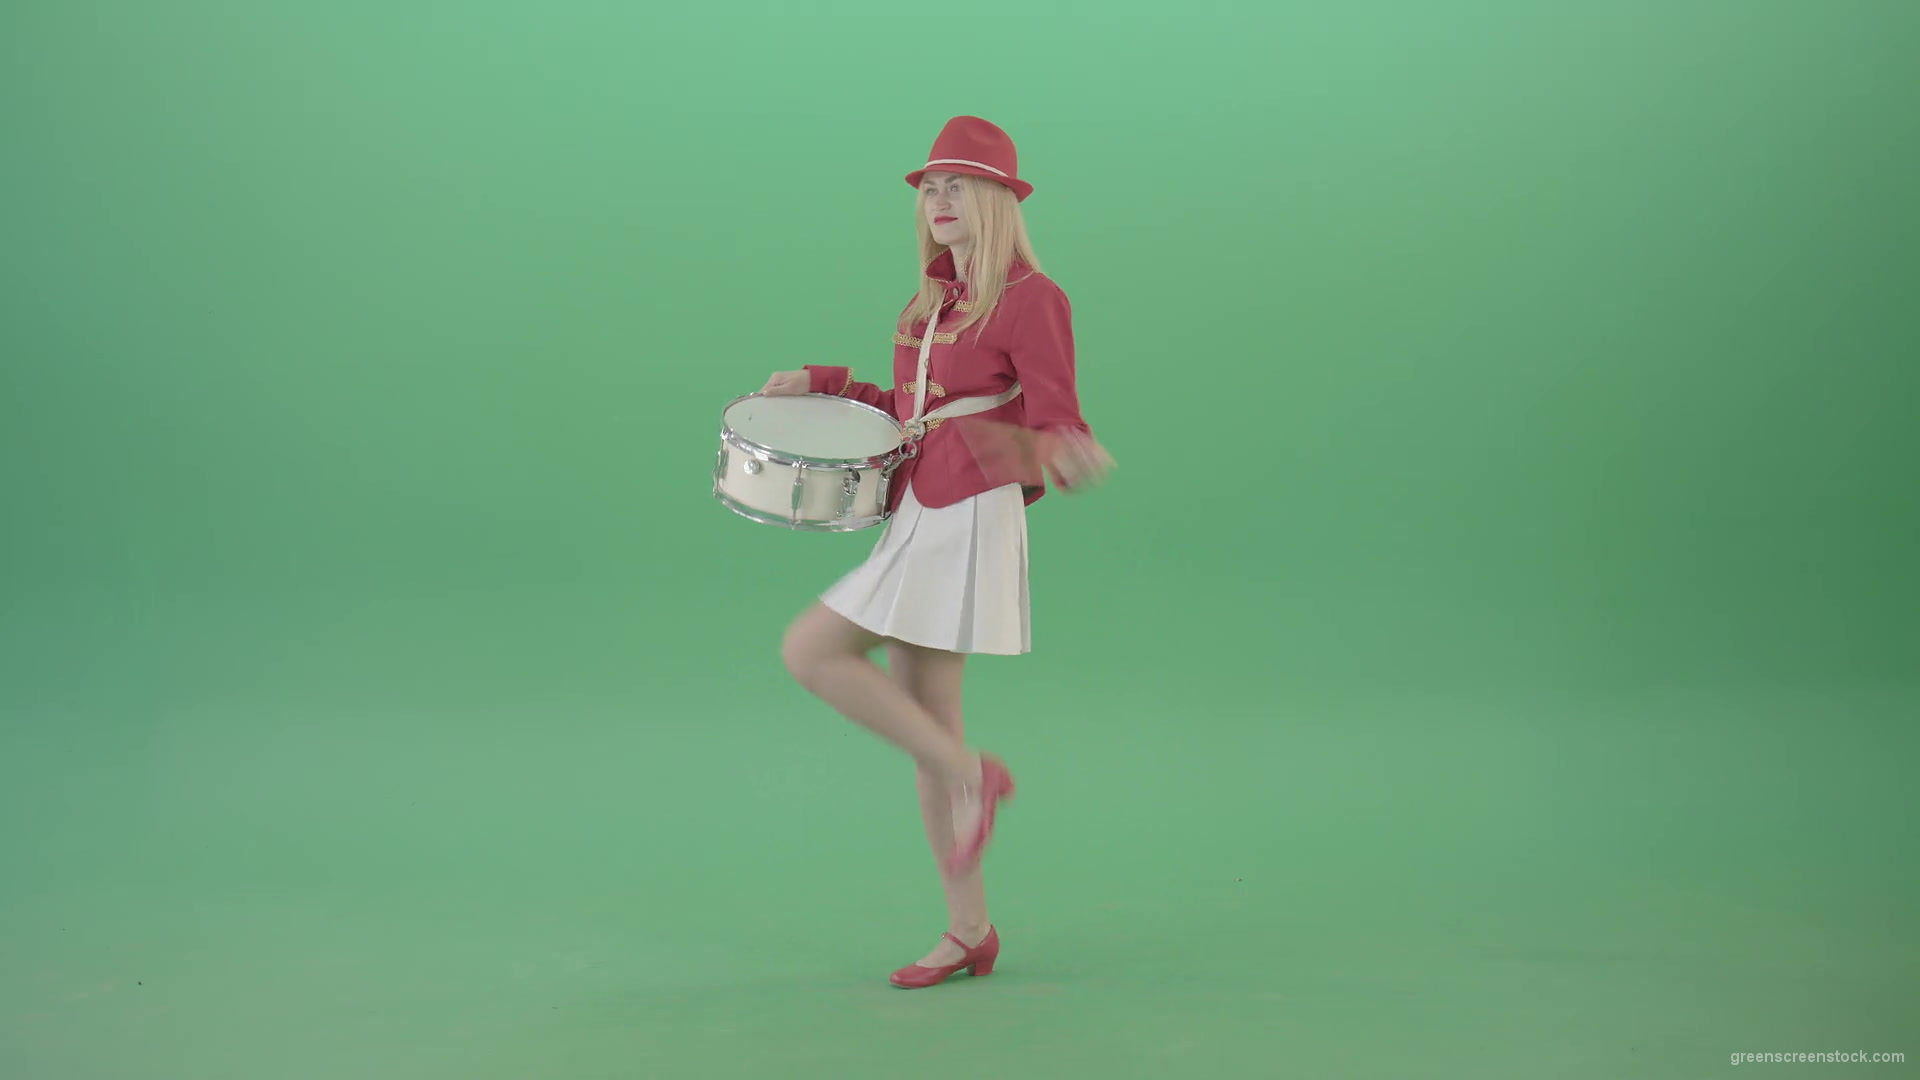 Girl-in-red-uniform-marching-and-play-snare-drum-on-green-screen-4K-Video-Footage-1920_002 Green Screen Stock